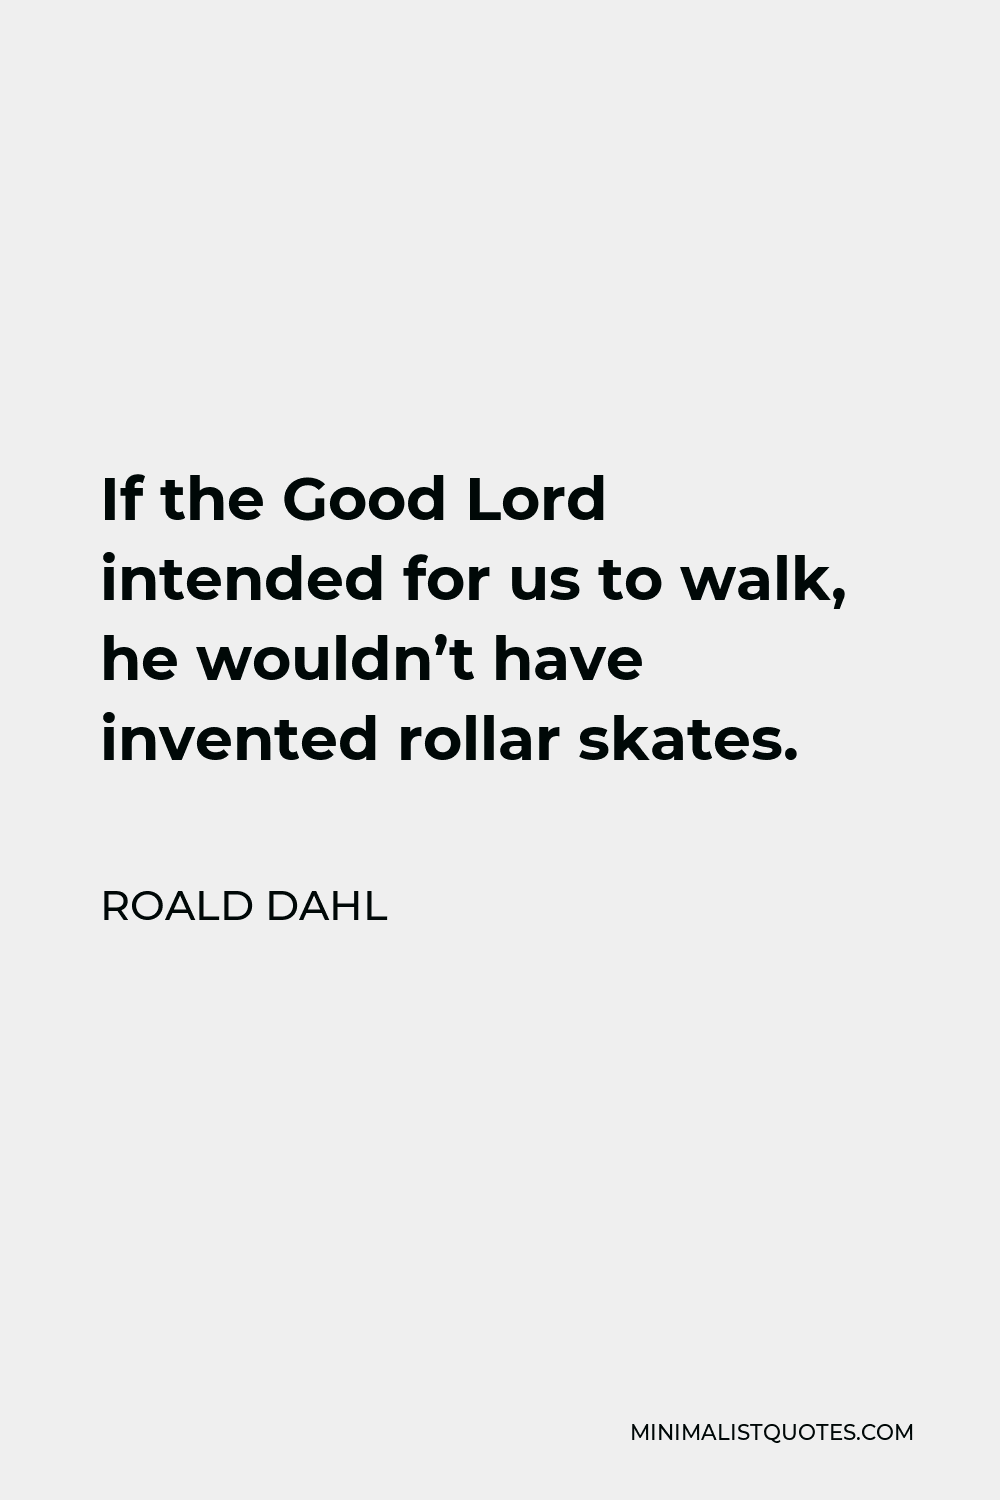 Roald Dahl Quote - If the Good Lord intended for us to walk, he wouldn’t have invented rollar skates.